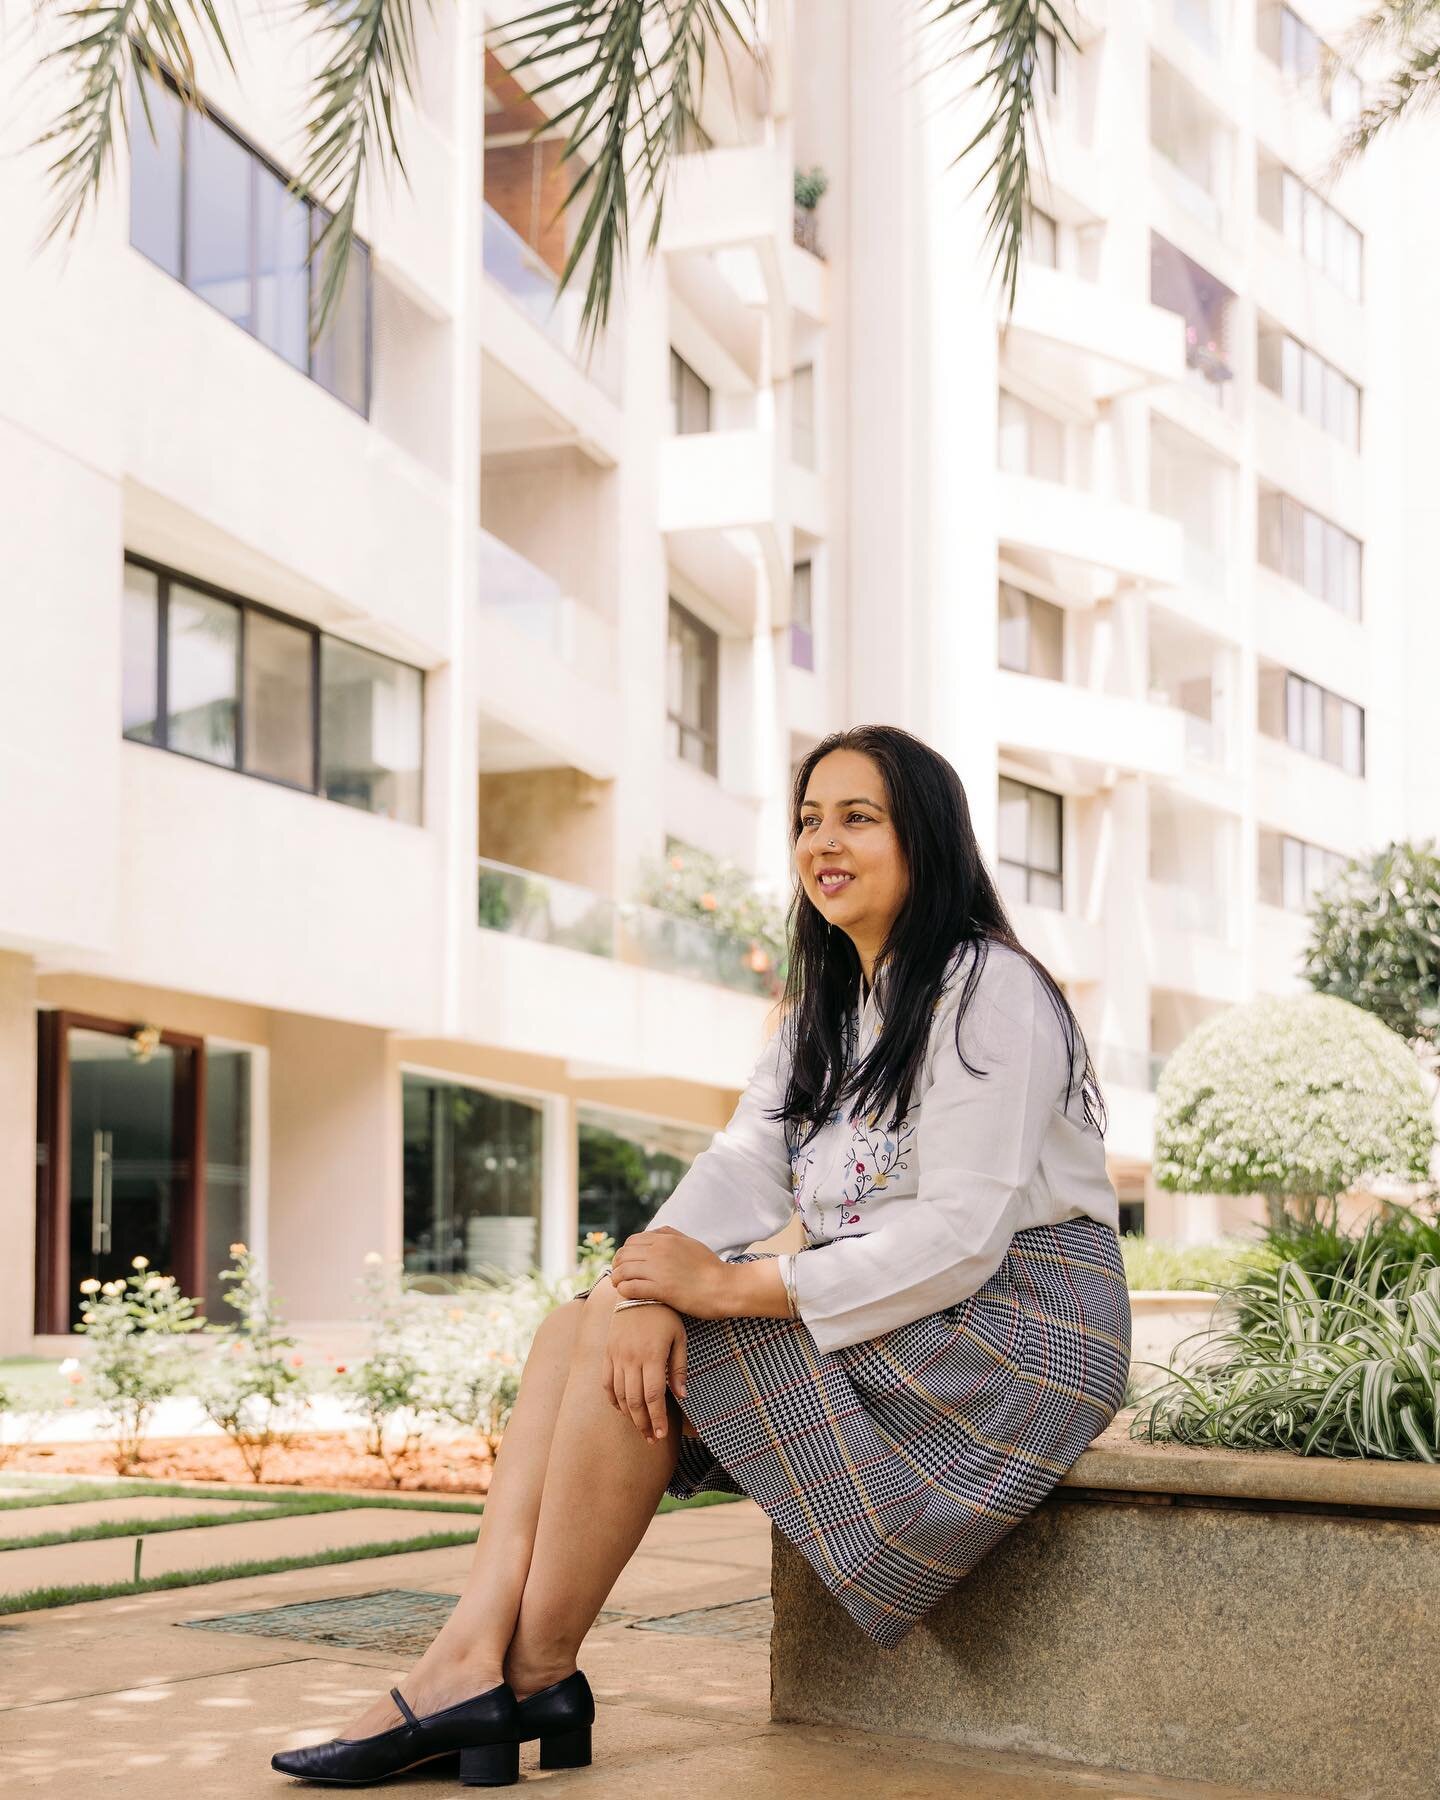 Chiteisri (@thewonderinggoddess) had her portrait session in her housing complex - which is a really special place for her. 

Her friend gifted her this session, and it was lovely to see how involved she is with her little community. Almost everyone 